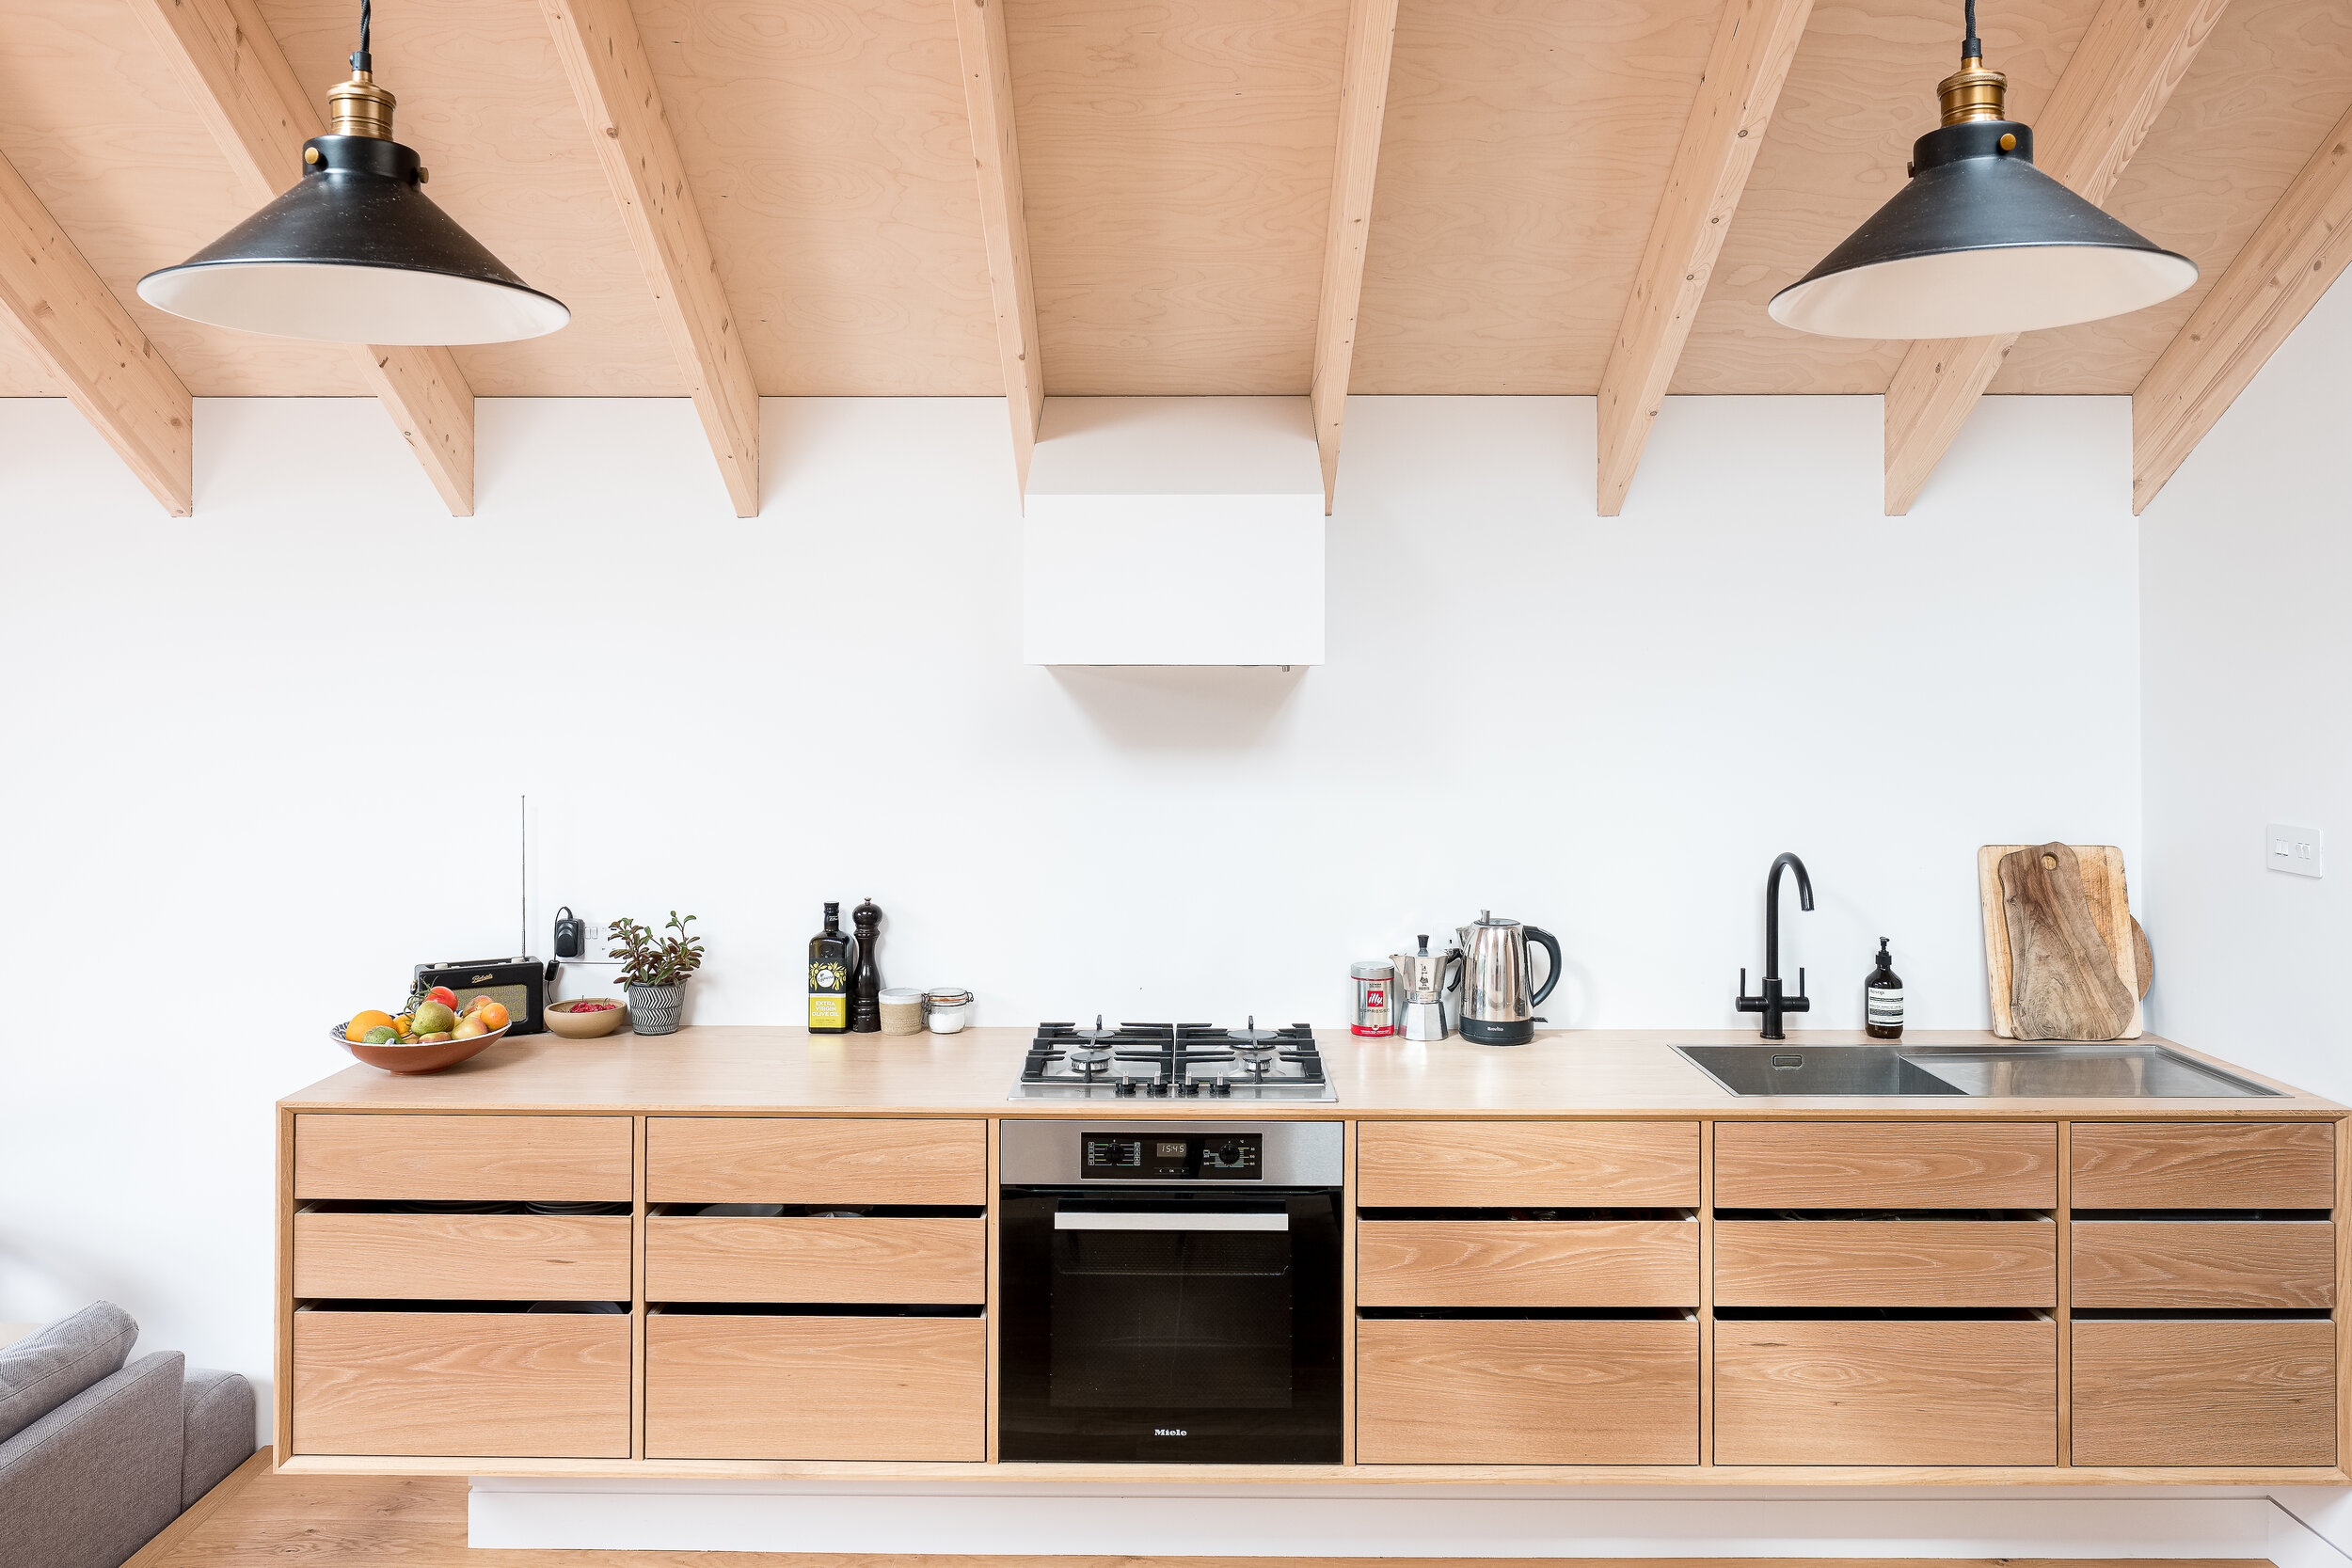 Fred+Howarth+Photography_Cabinet+Makers+House_08.jpg